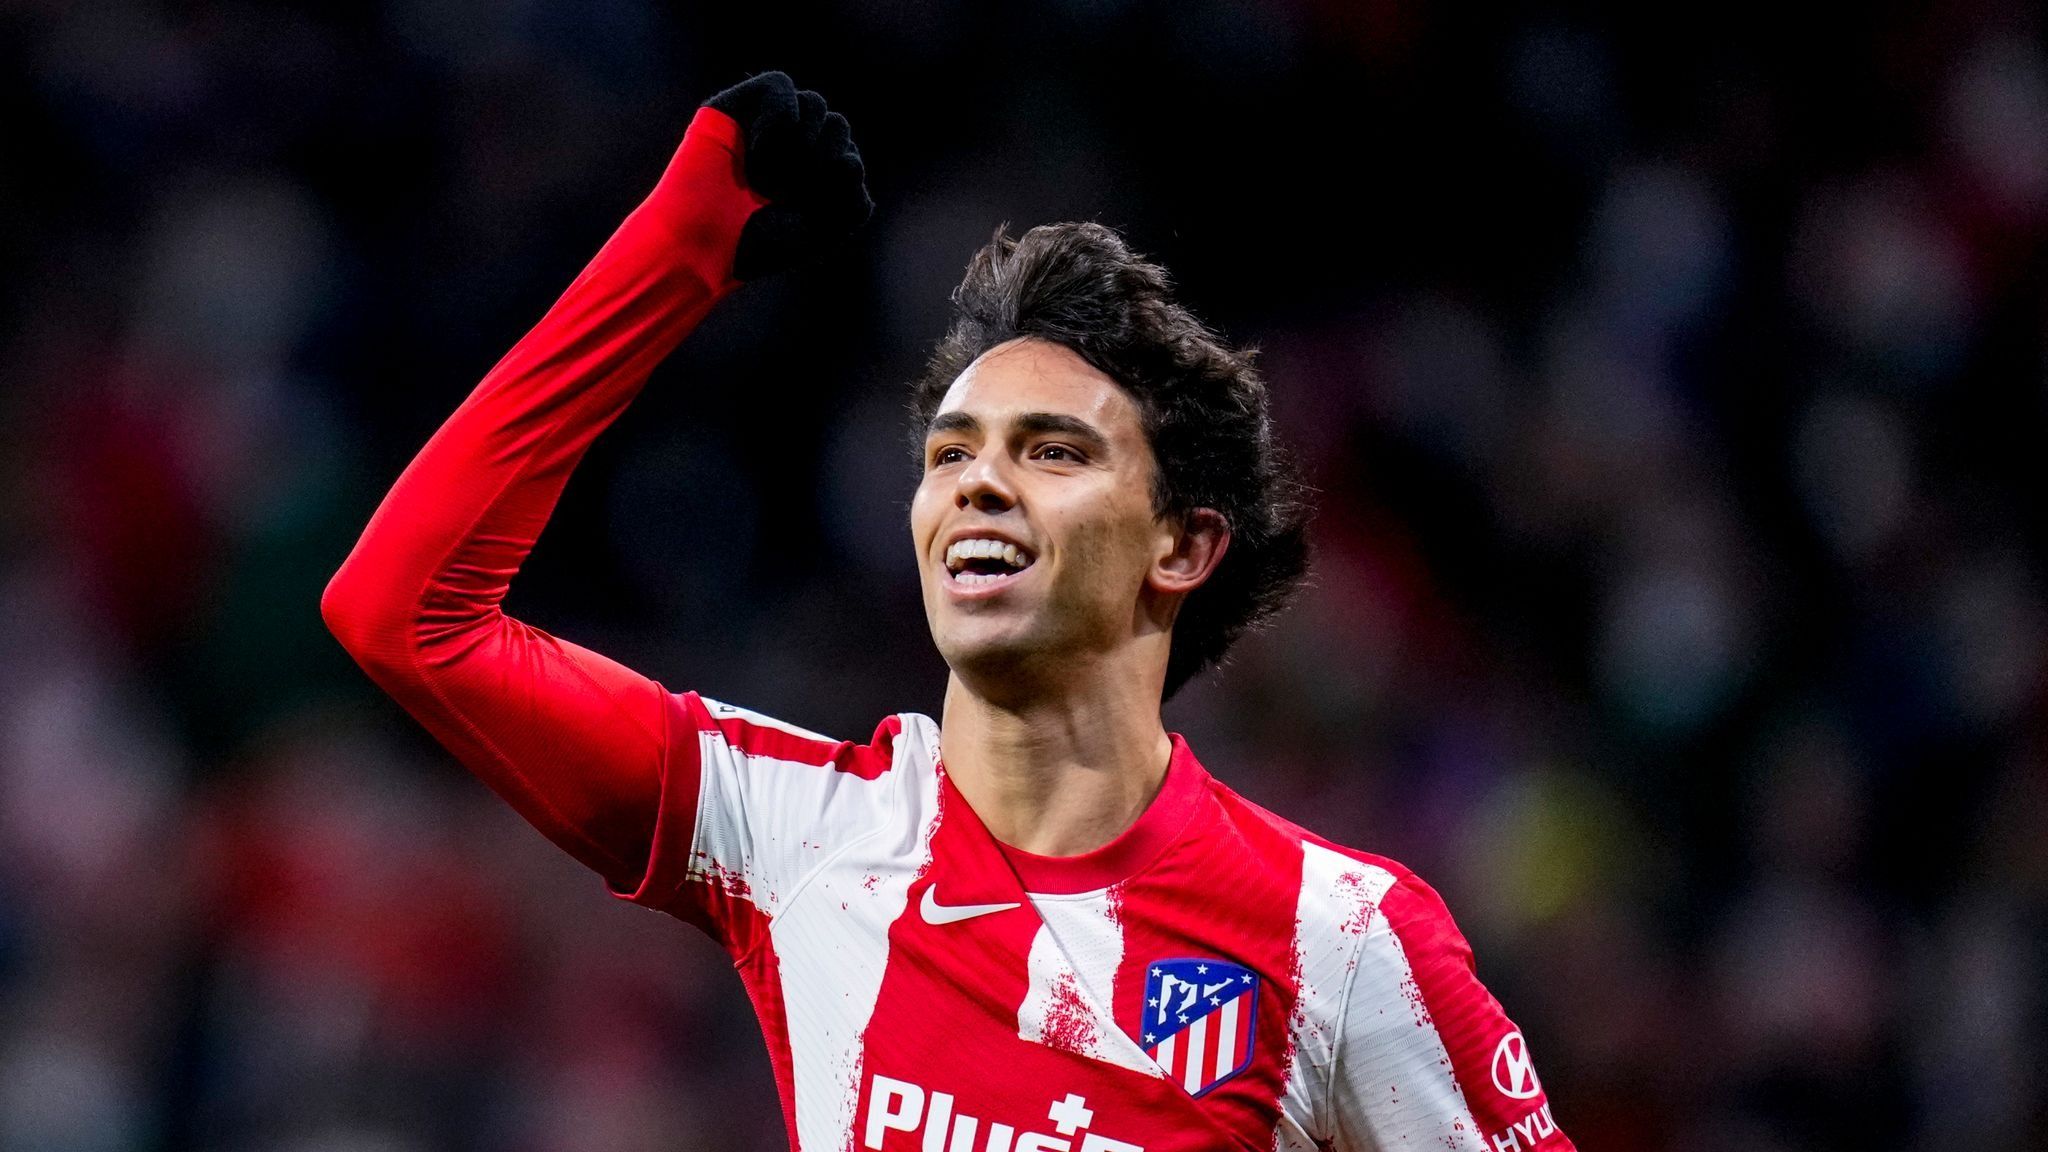 Atletico Plan To Get 70-80 Million Euros From Félix's Transfer To Barcelona